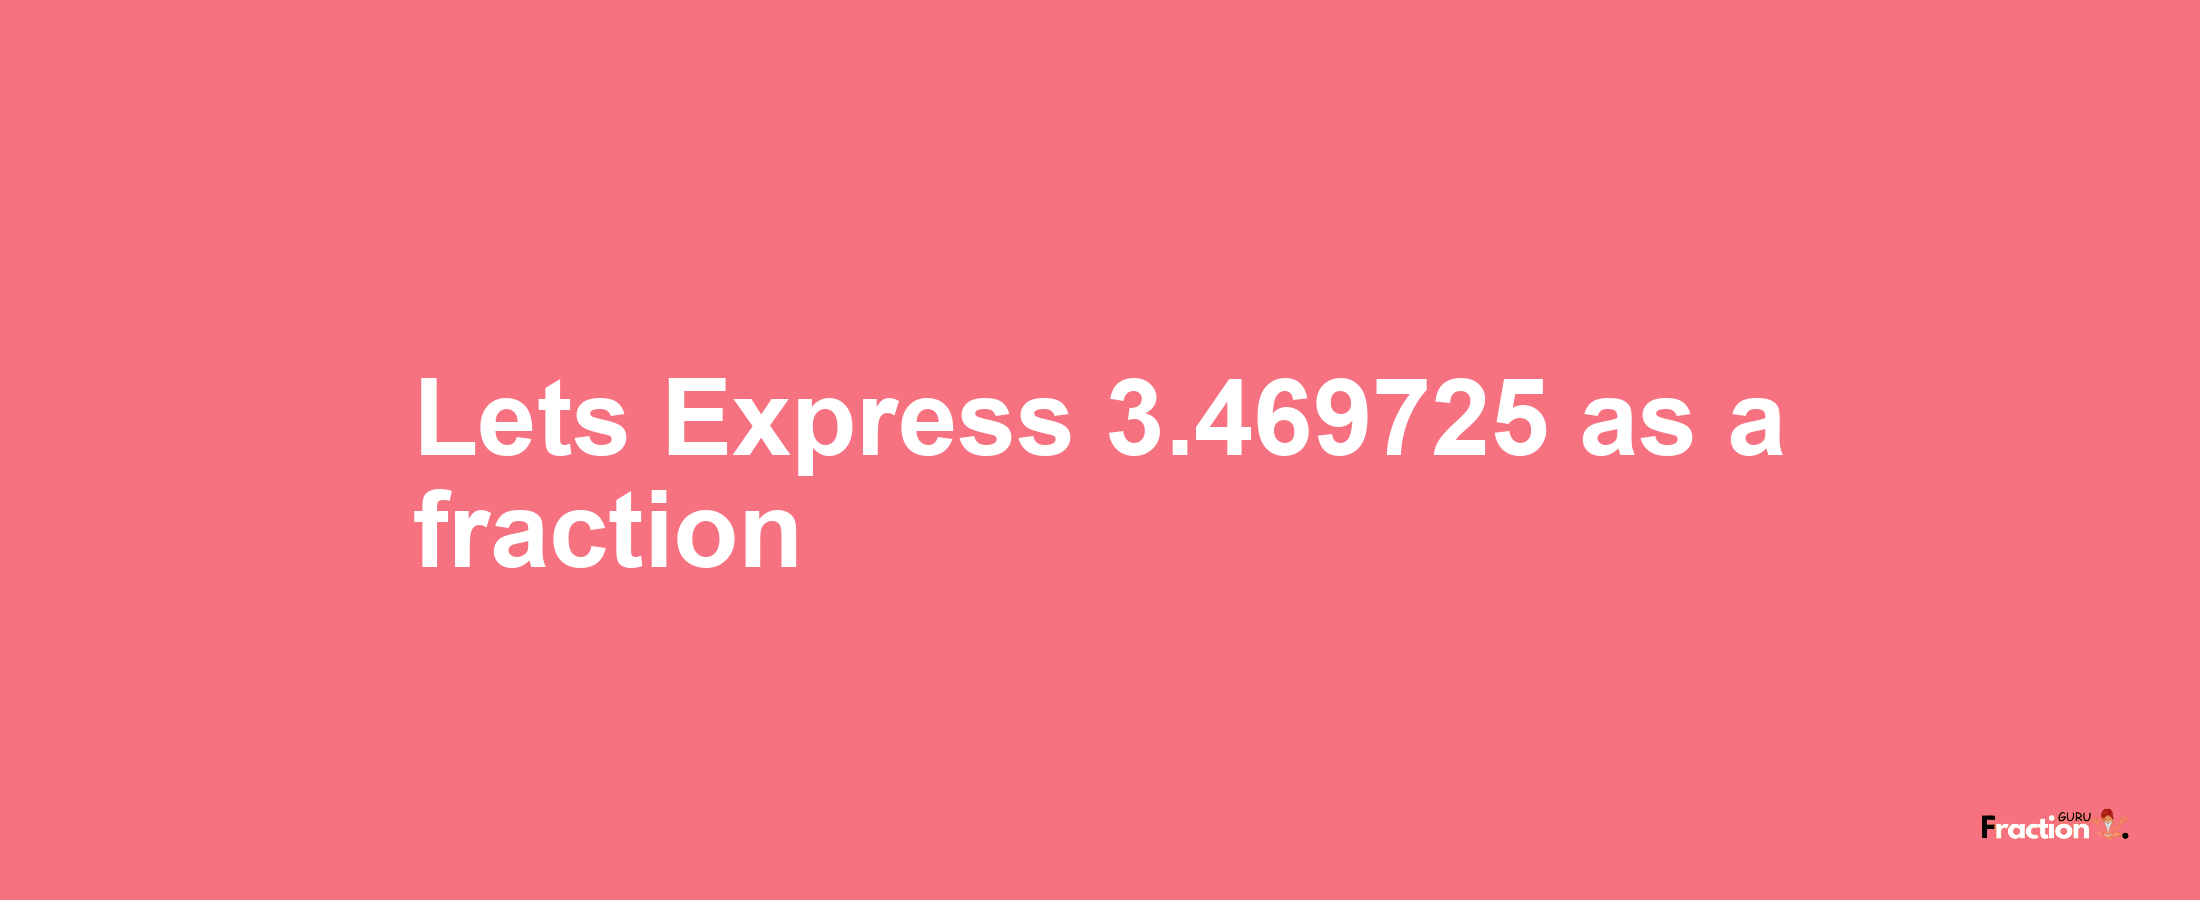 Lets Express 3.469725 as afraction